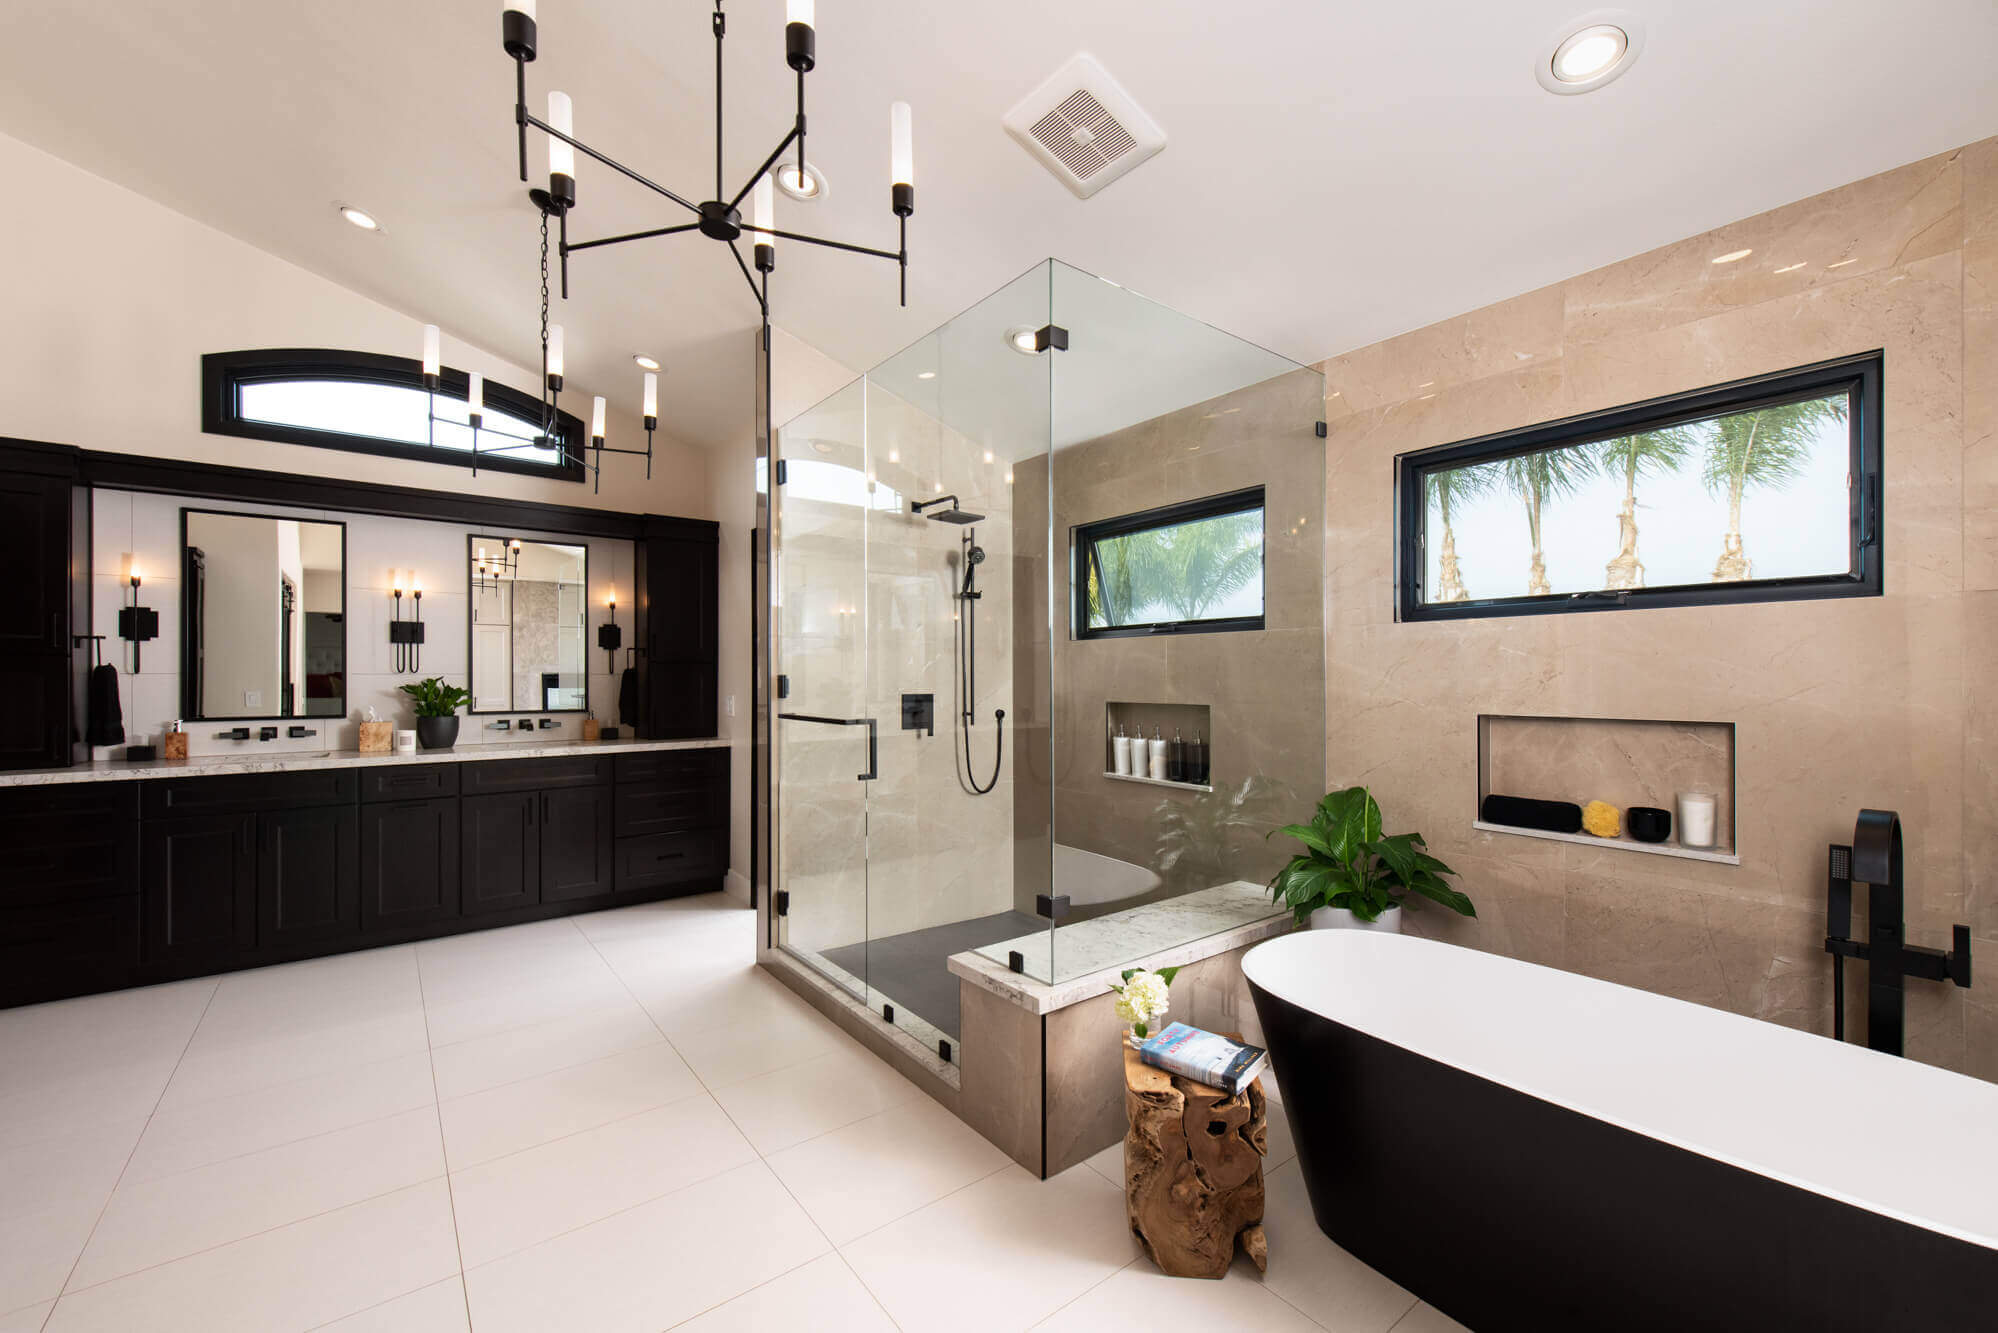 Walk-in shower with glass walls